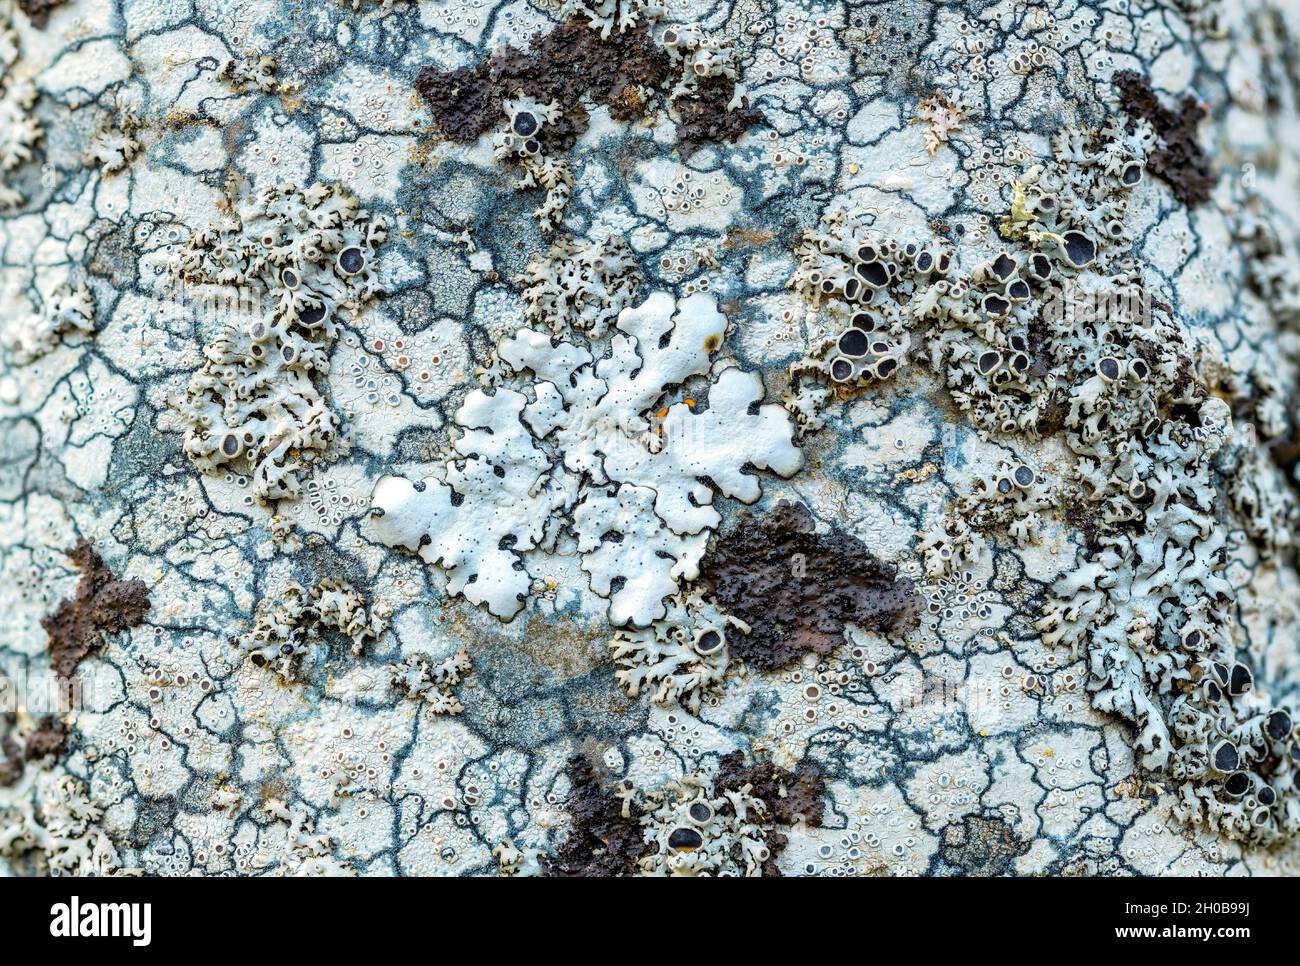 Crustaceous, gelatinous and foliaceous lichens on a mountain trunk. This living mosaic presents the 3 typical forms of lichen thallus, fungi associate Stock Photo